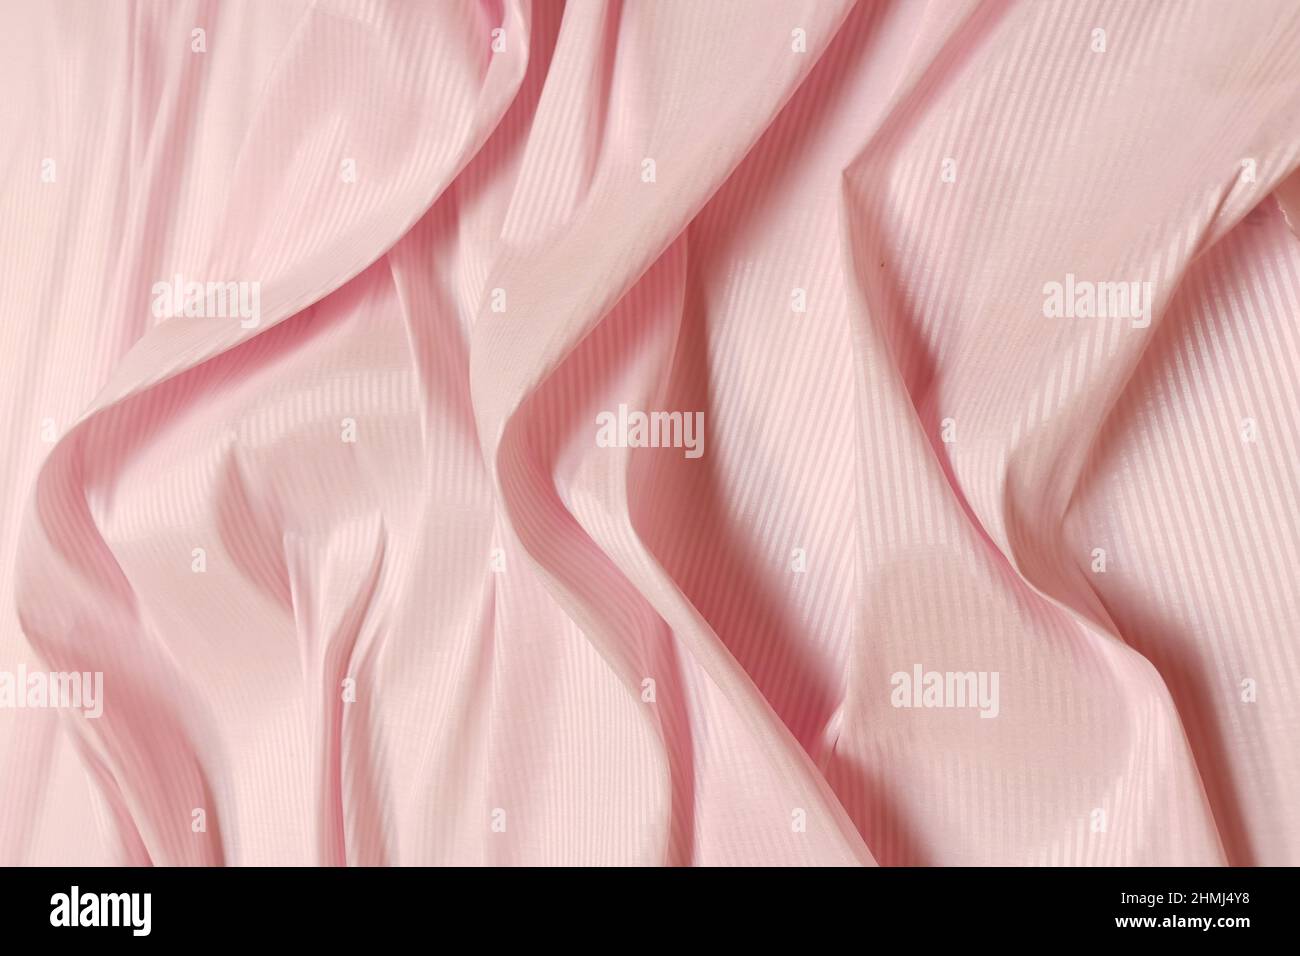 Pink crumpled or wavy fabric texture background. Abstract linen cloth soft  waves. Silk atlas or stretch jacquard. Smooth elegant luxury cloth texture  Stock Photo - Alamy